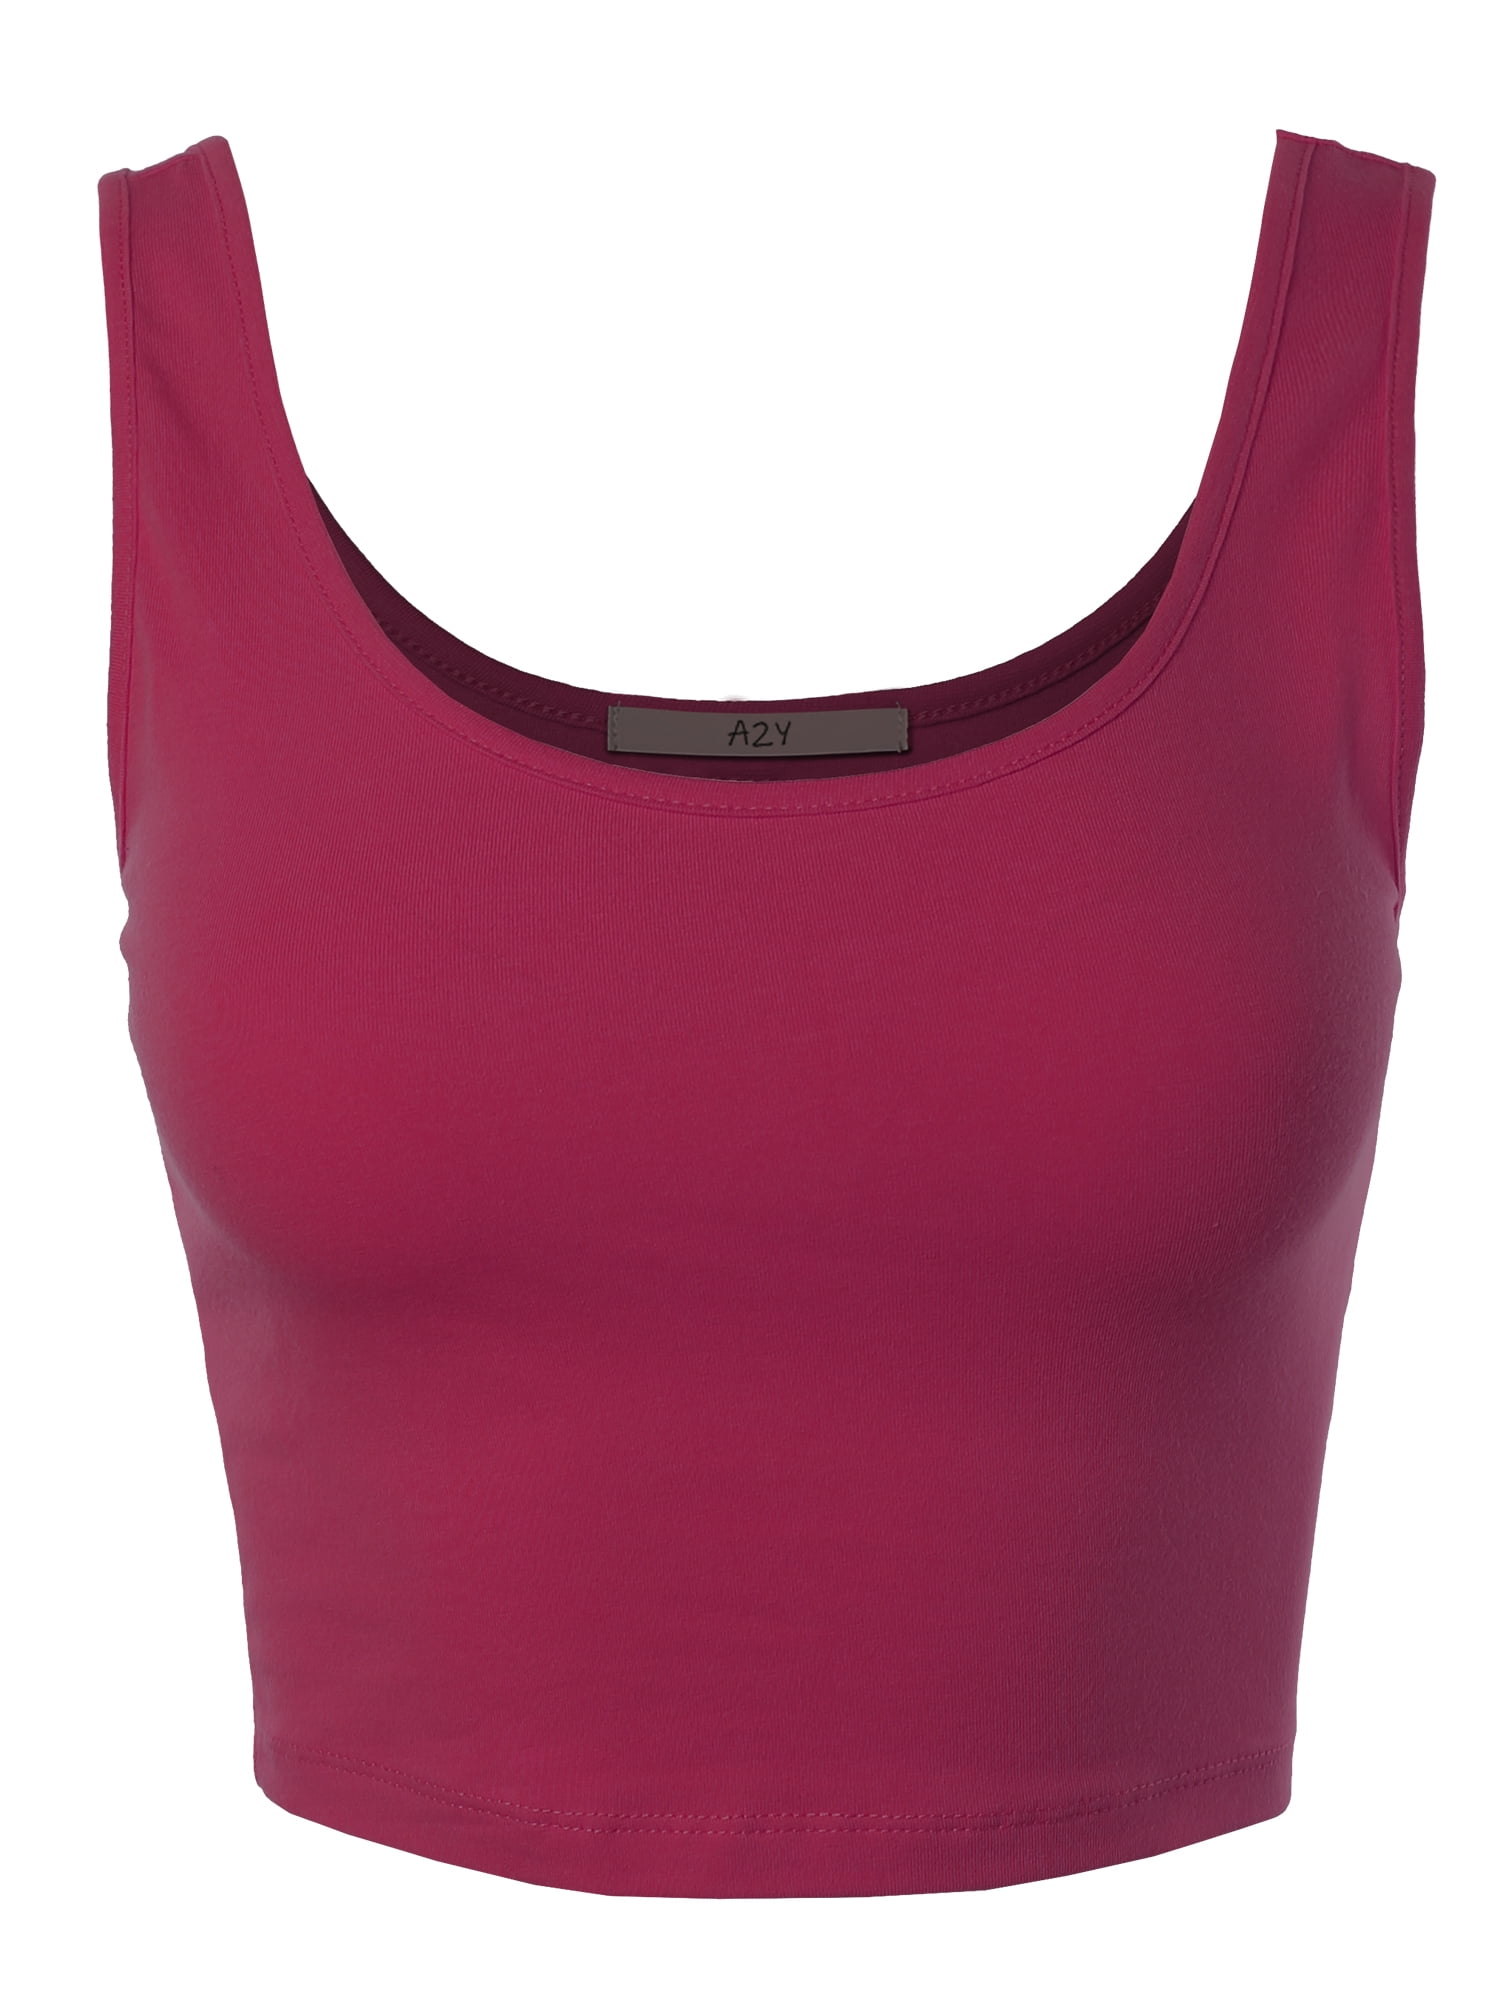 A2Y Women's Fitted Cotton Scoop Neck Sleeveless Crop Tank Top Magenta L ...